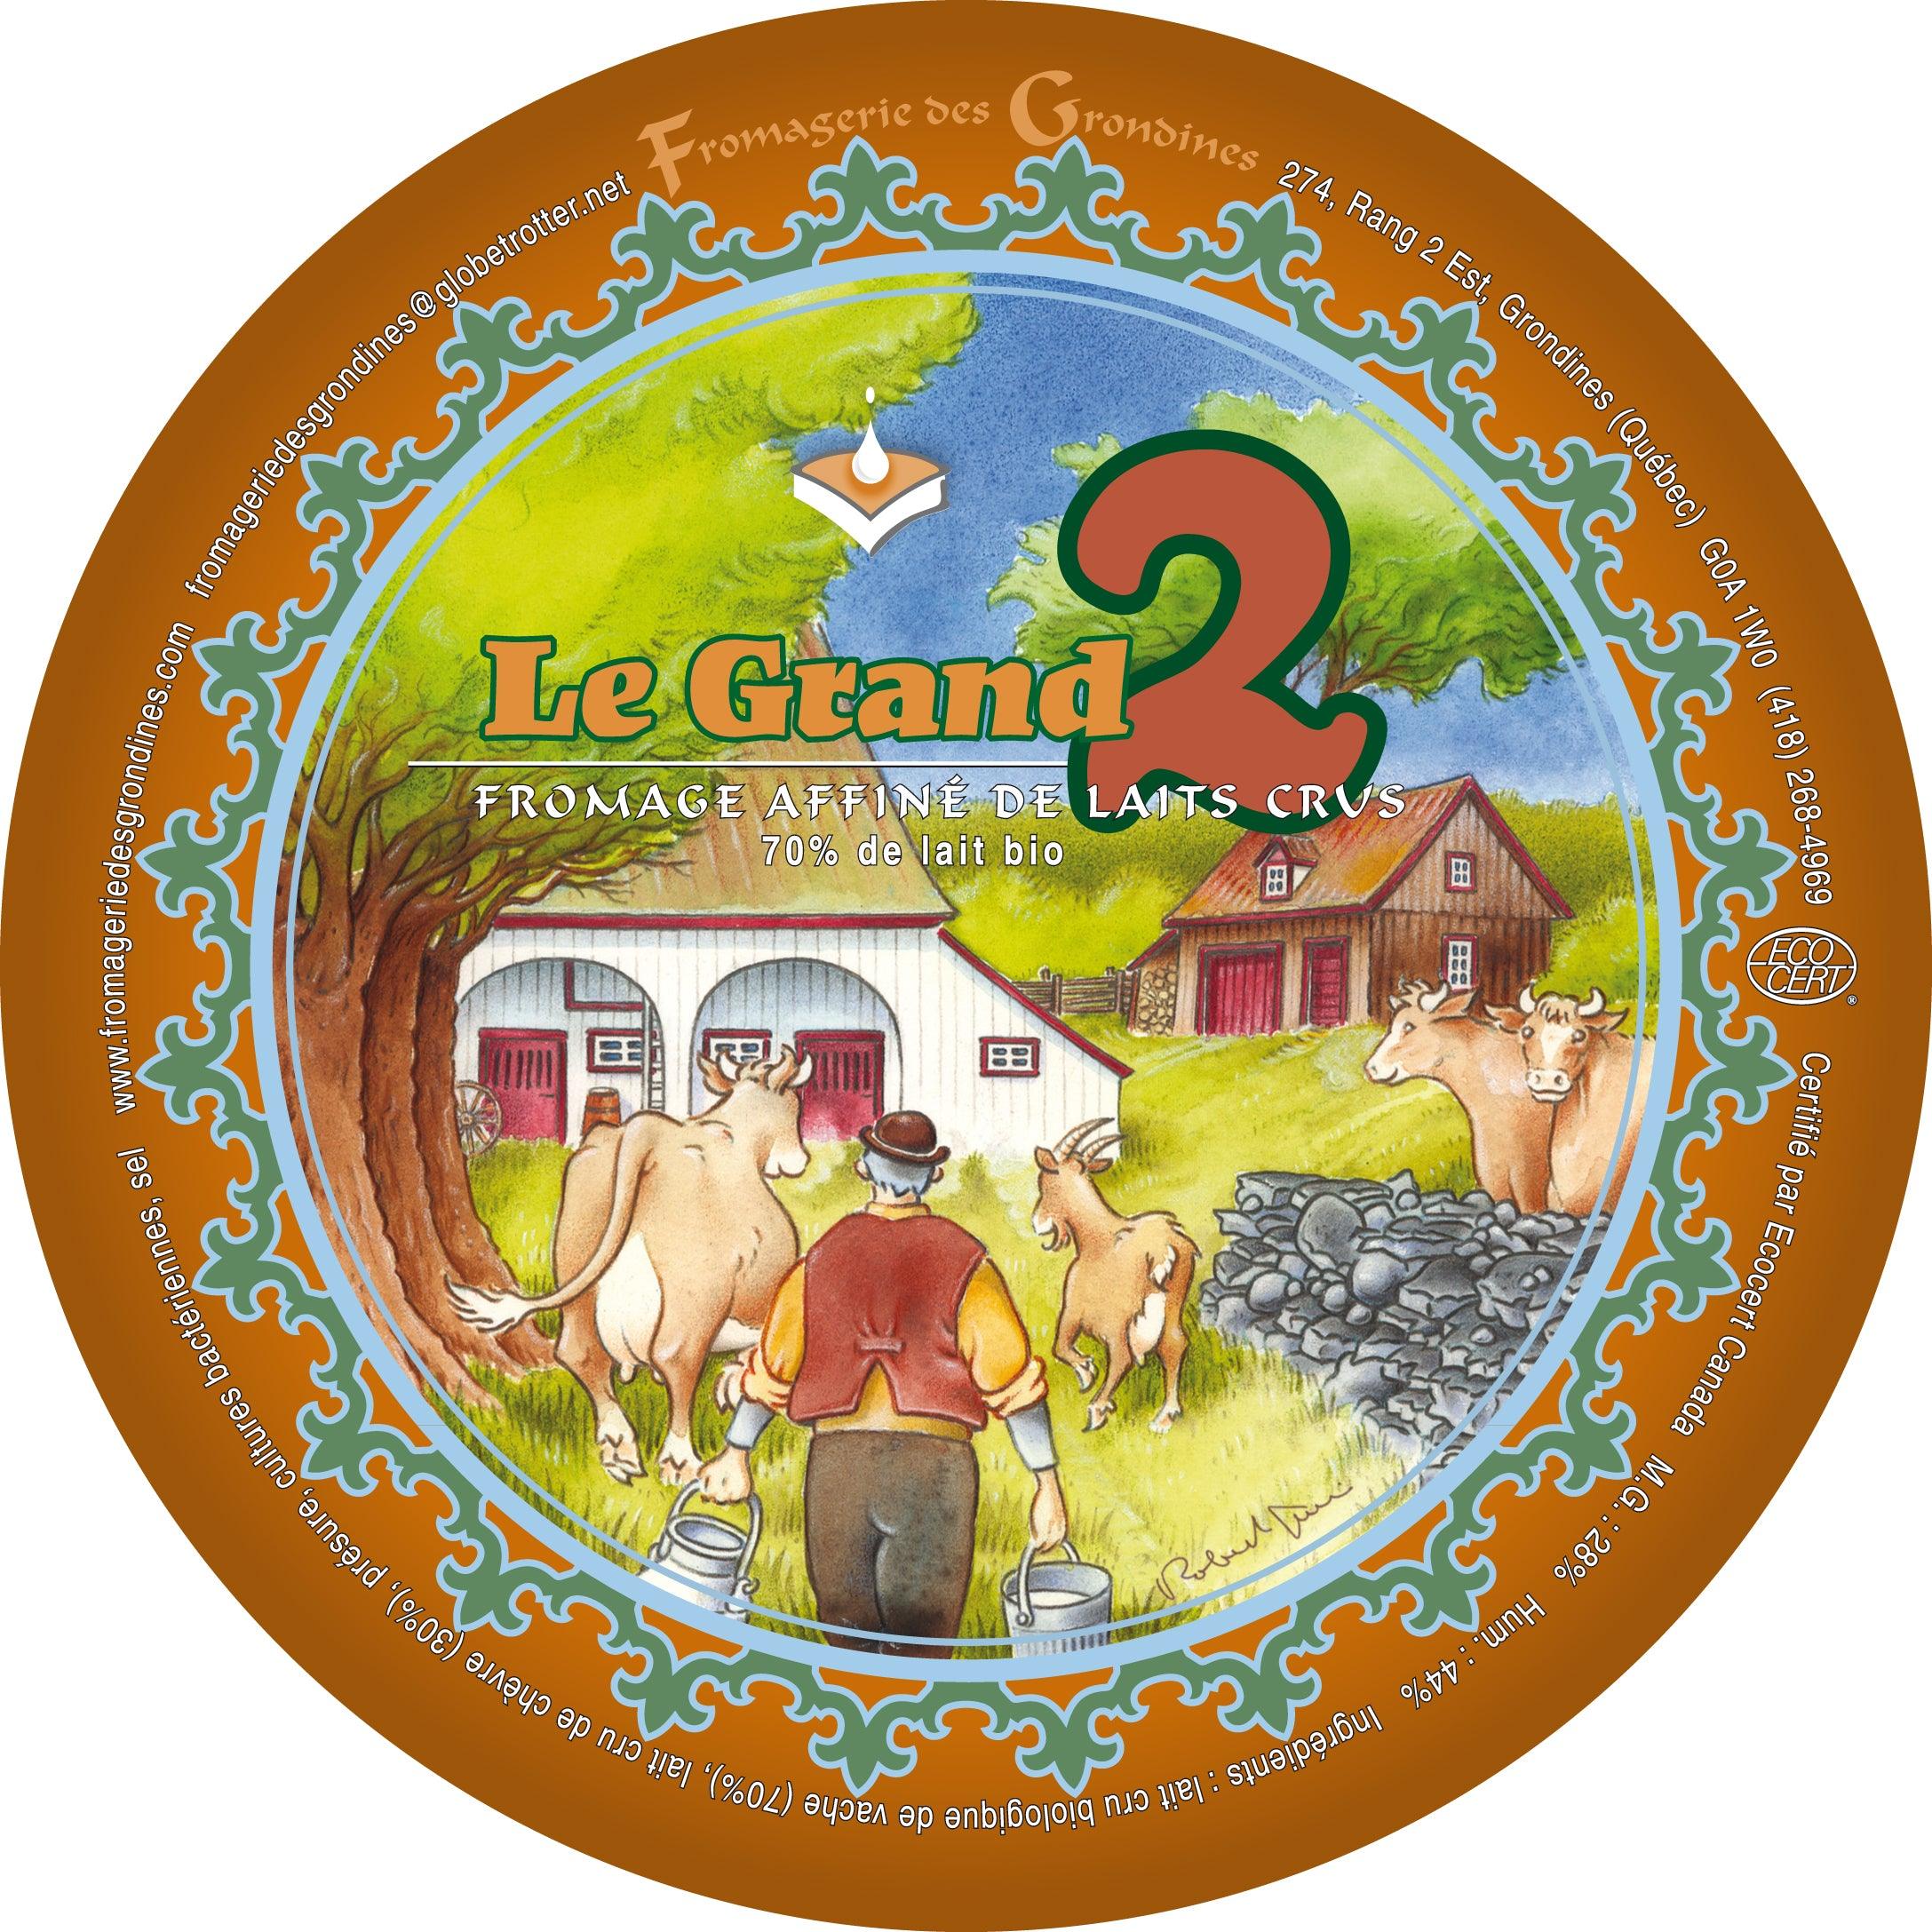 Grand 2 - Fromagerie des Grondines